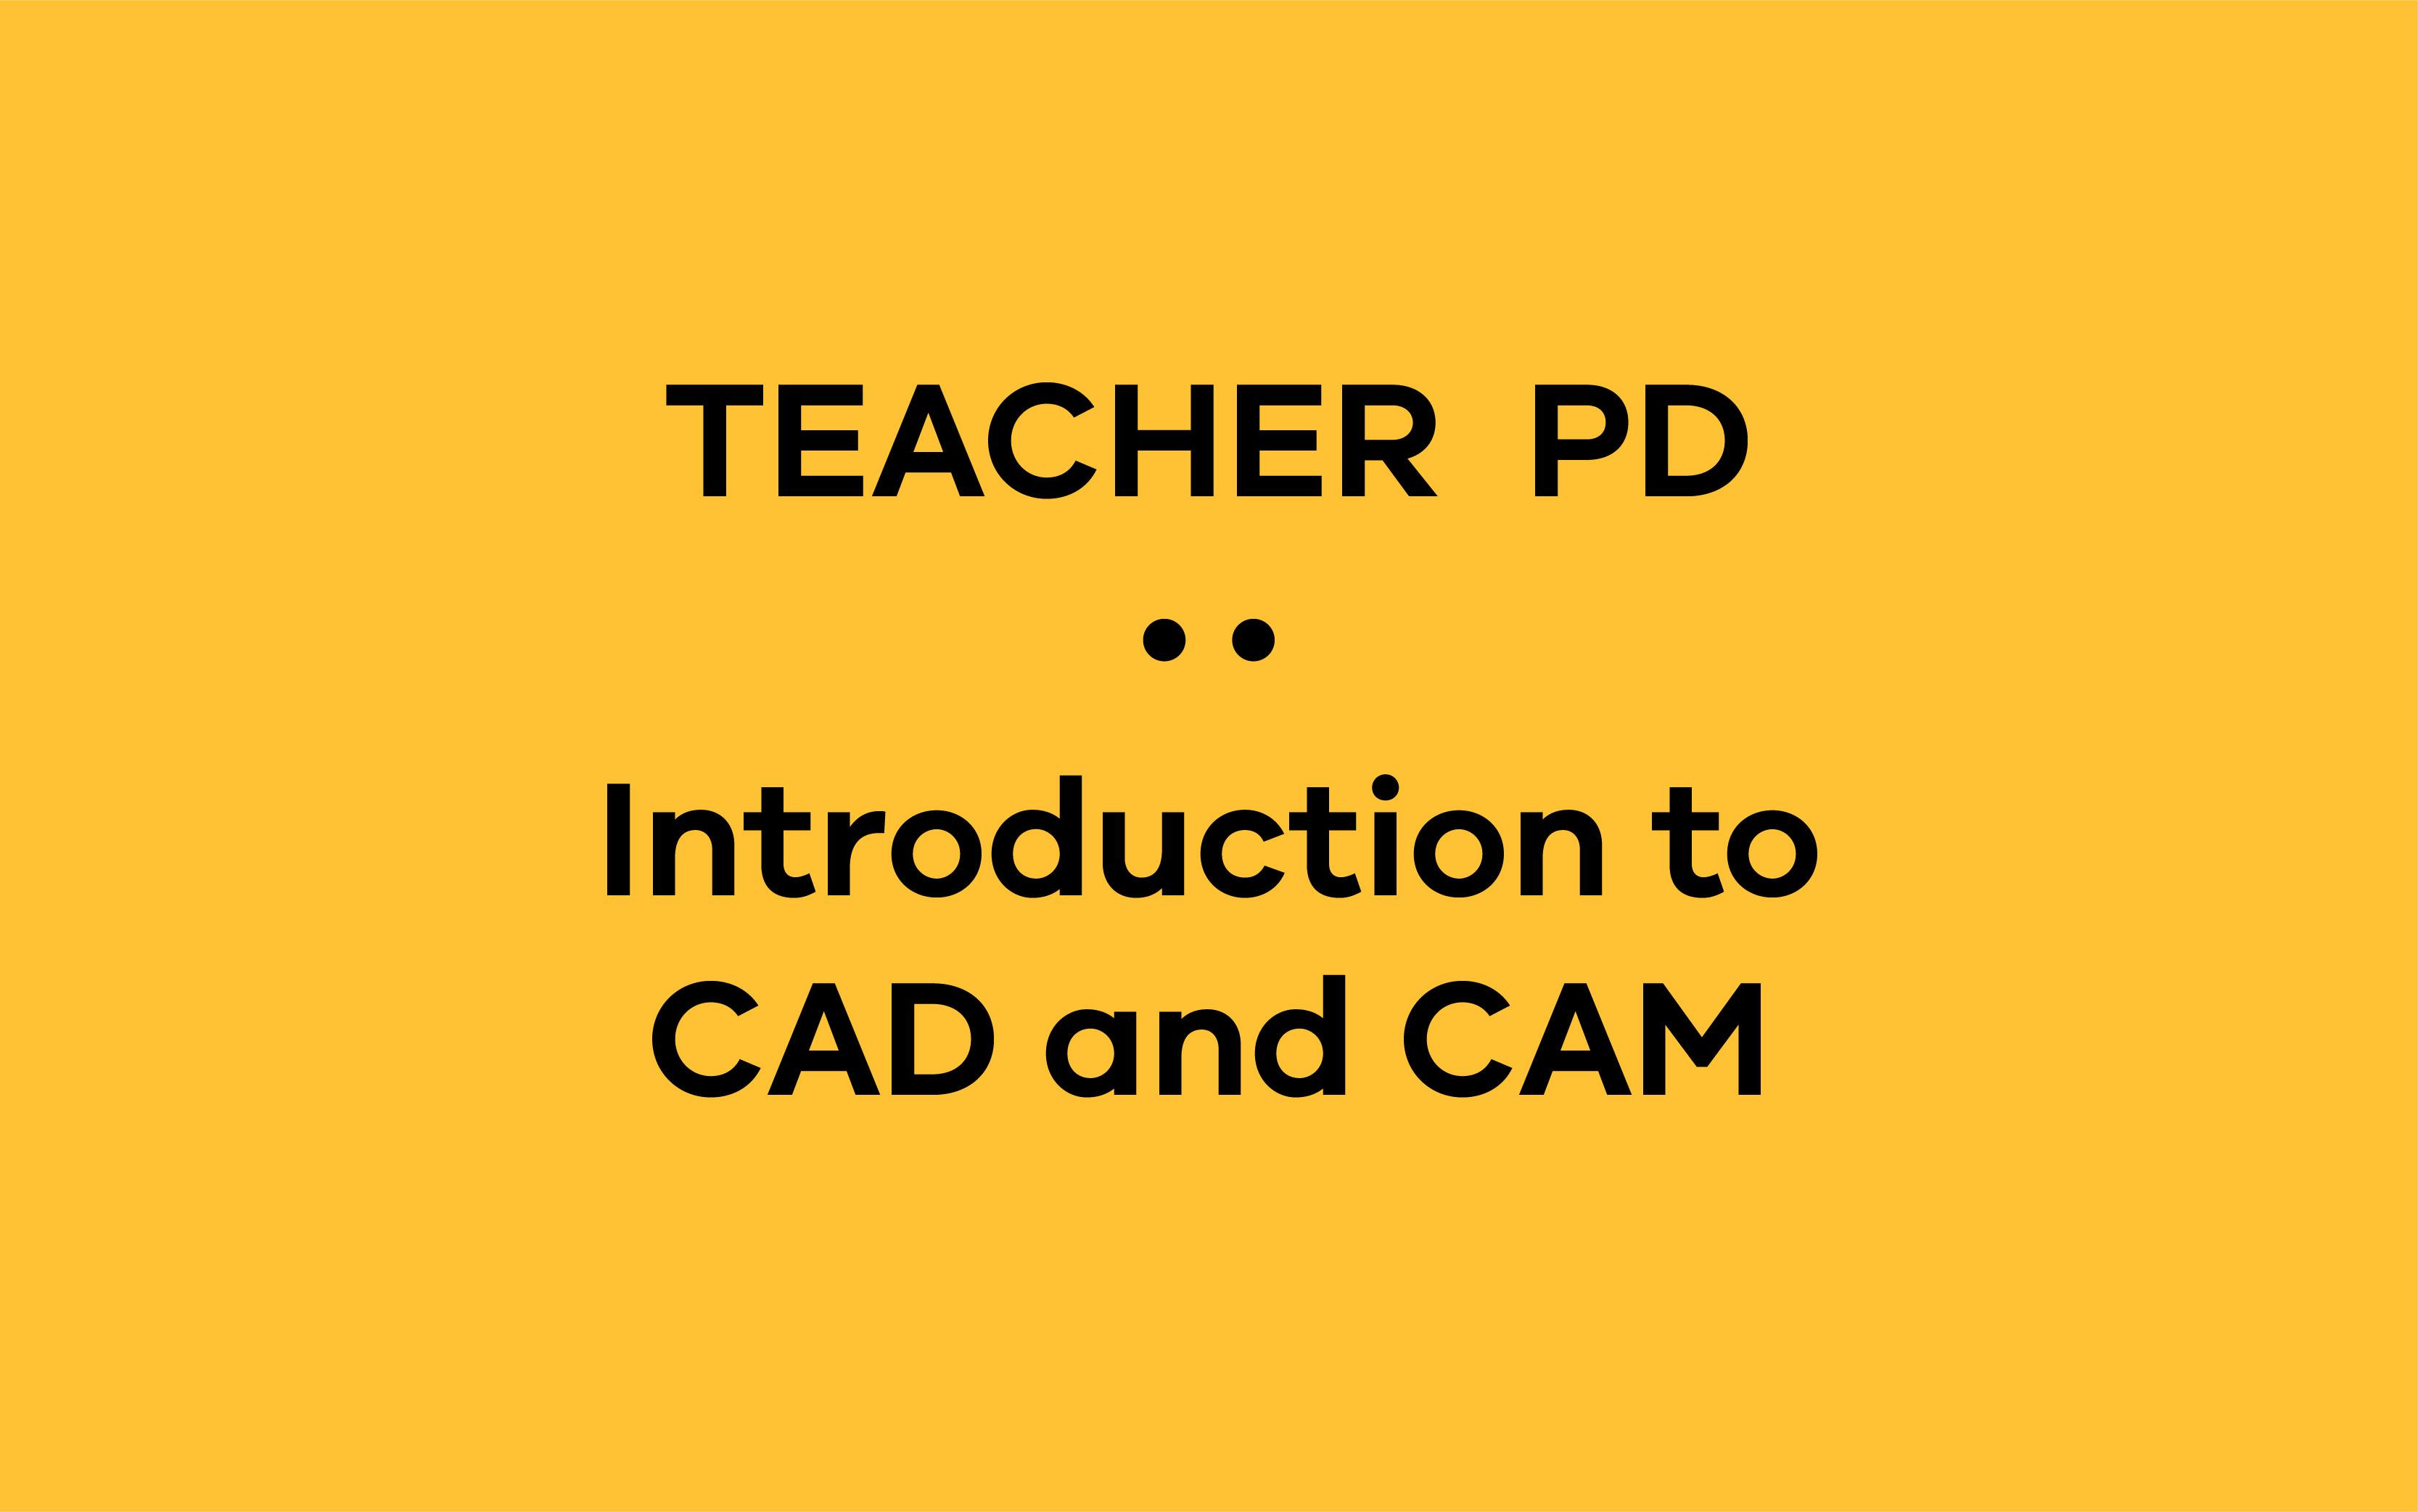 Introduction to: CAD / CAM